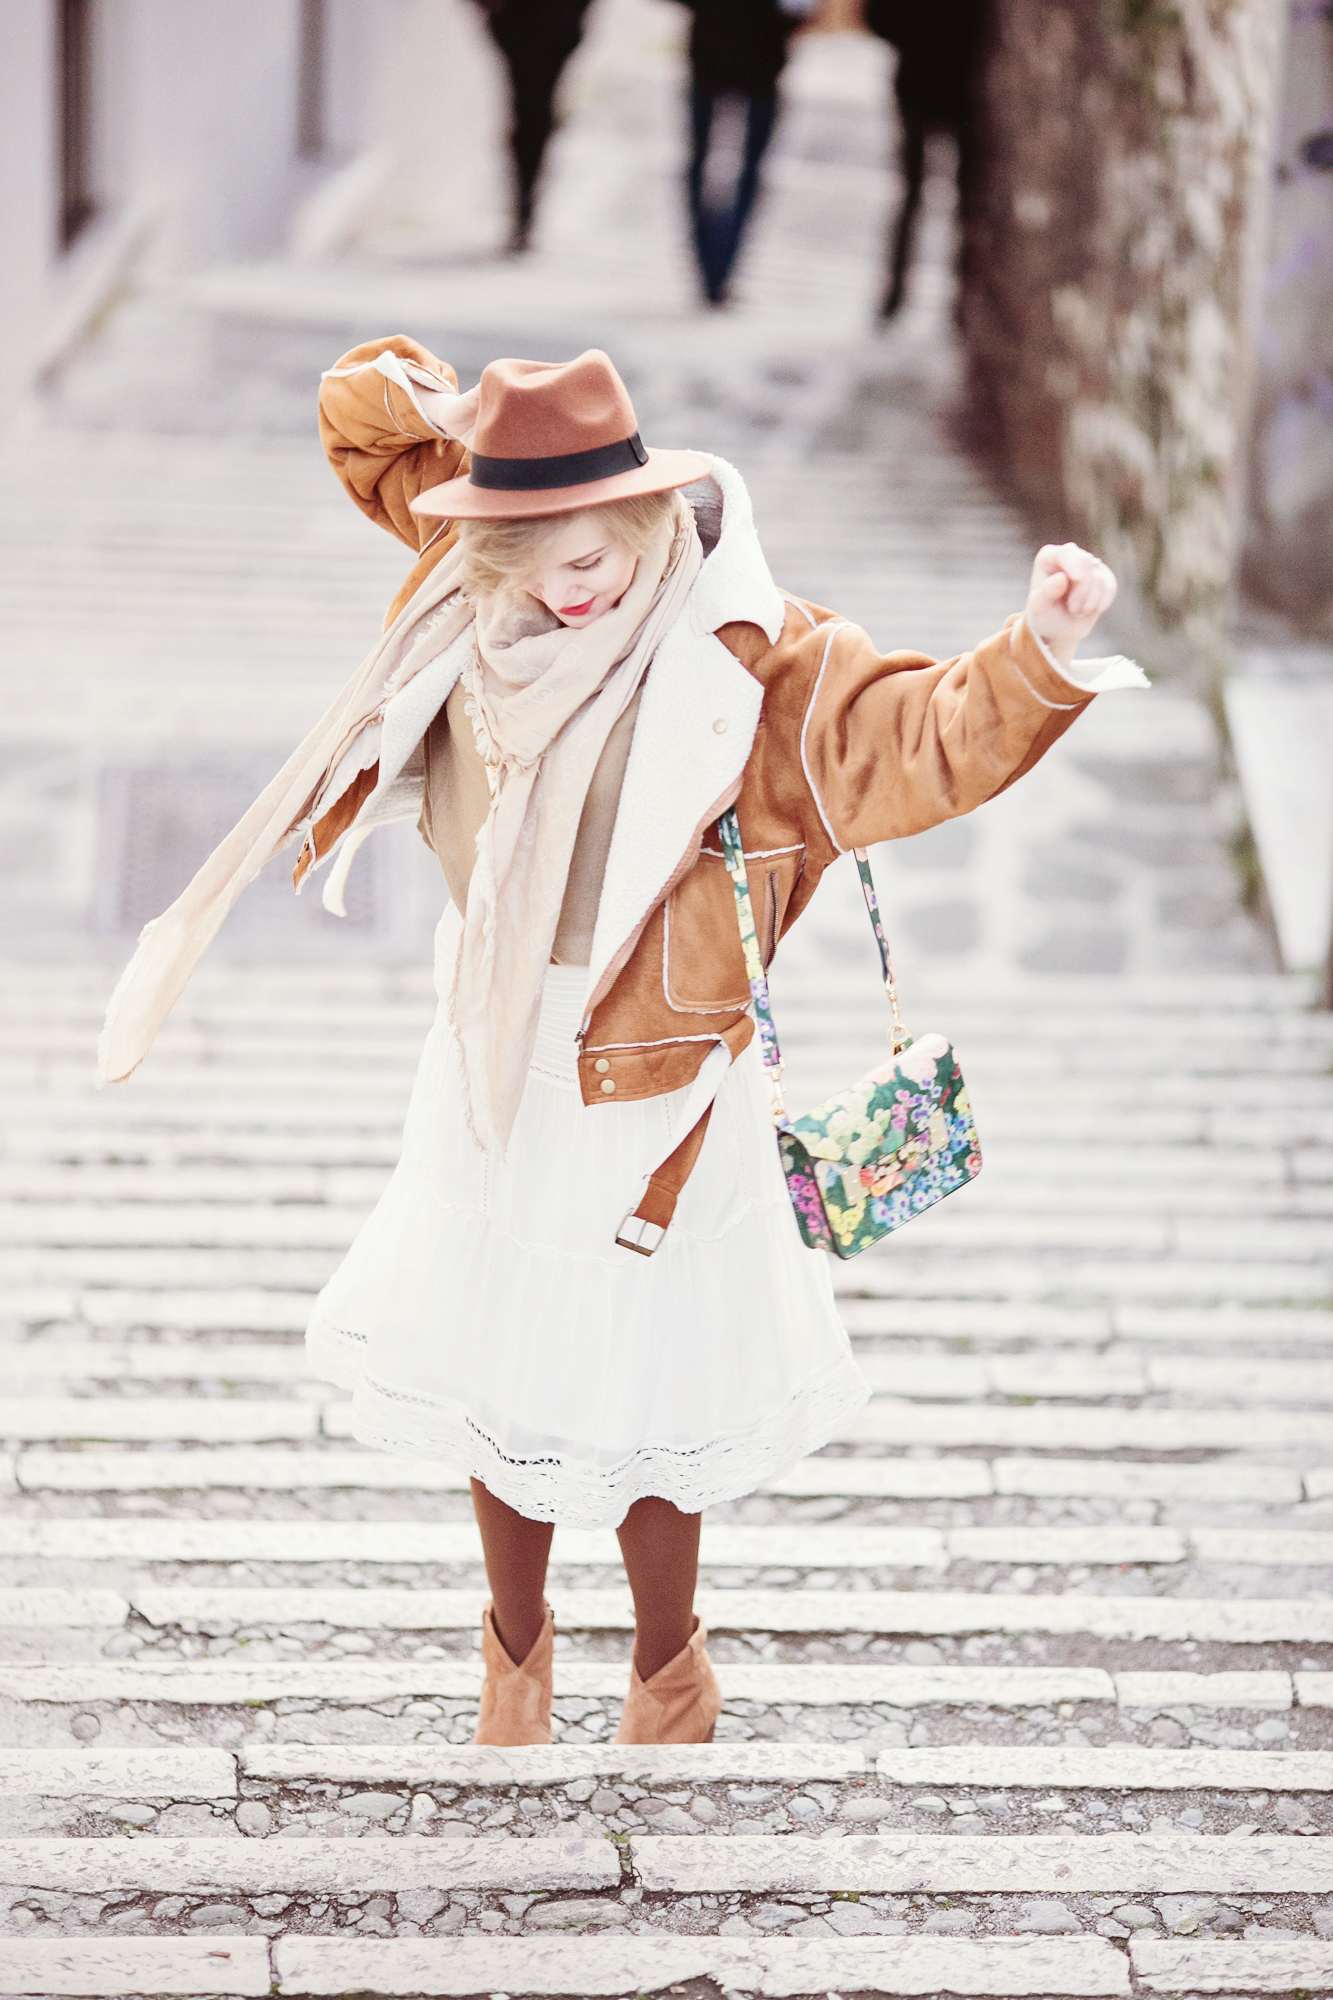 darya kamalova thecablook russian italian fashion bogger street style trend hm hat chicwish coat gucci scarf sophie hulme bag floral asos white skirt ash booties brescia centro storico italia italy-21 copy